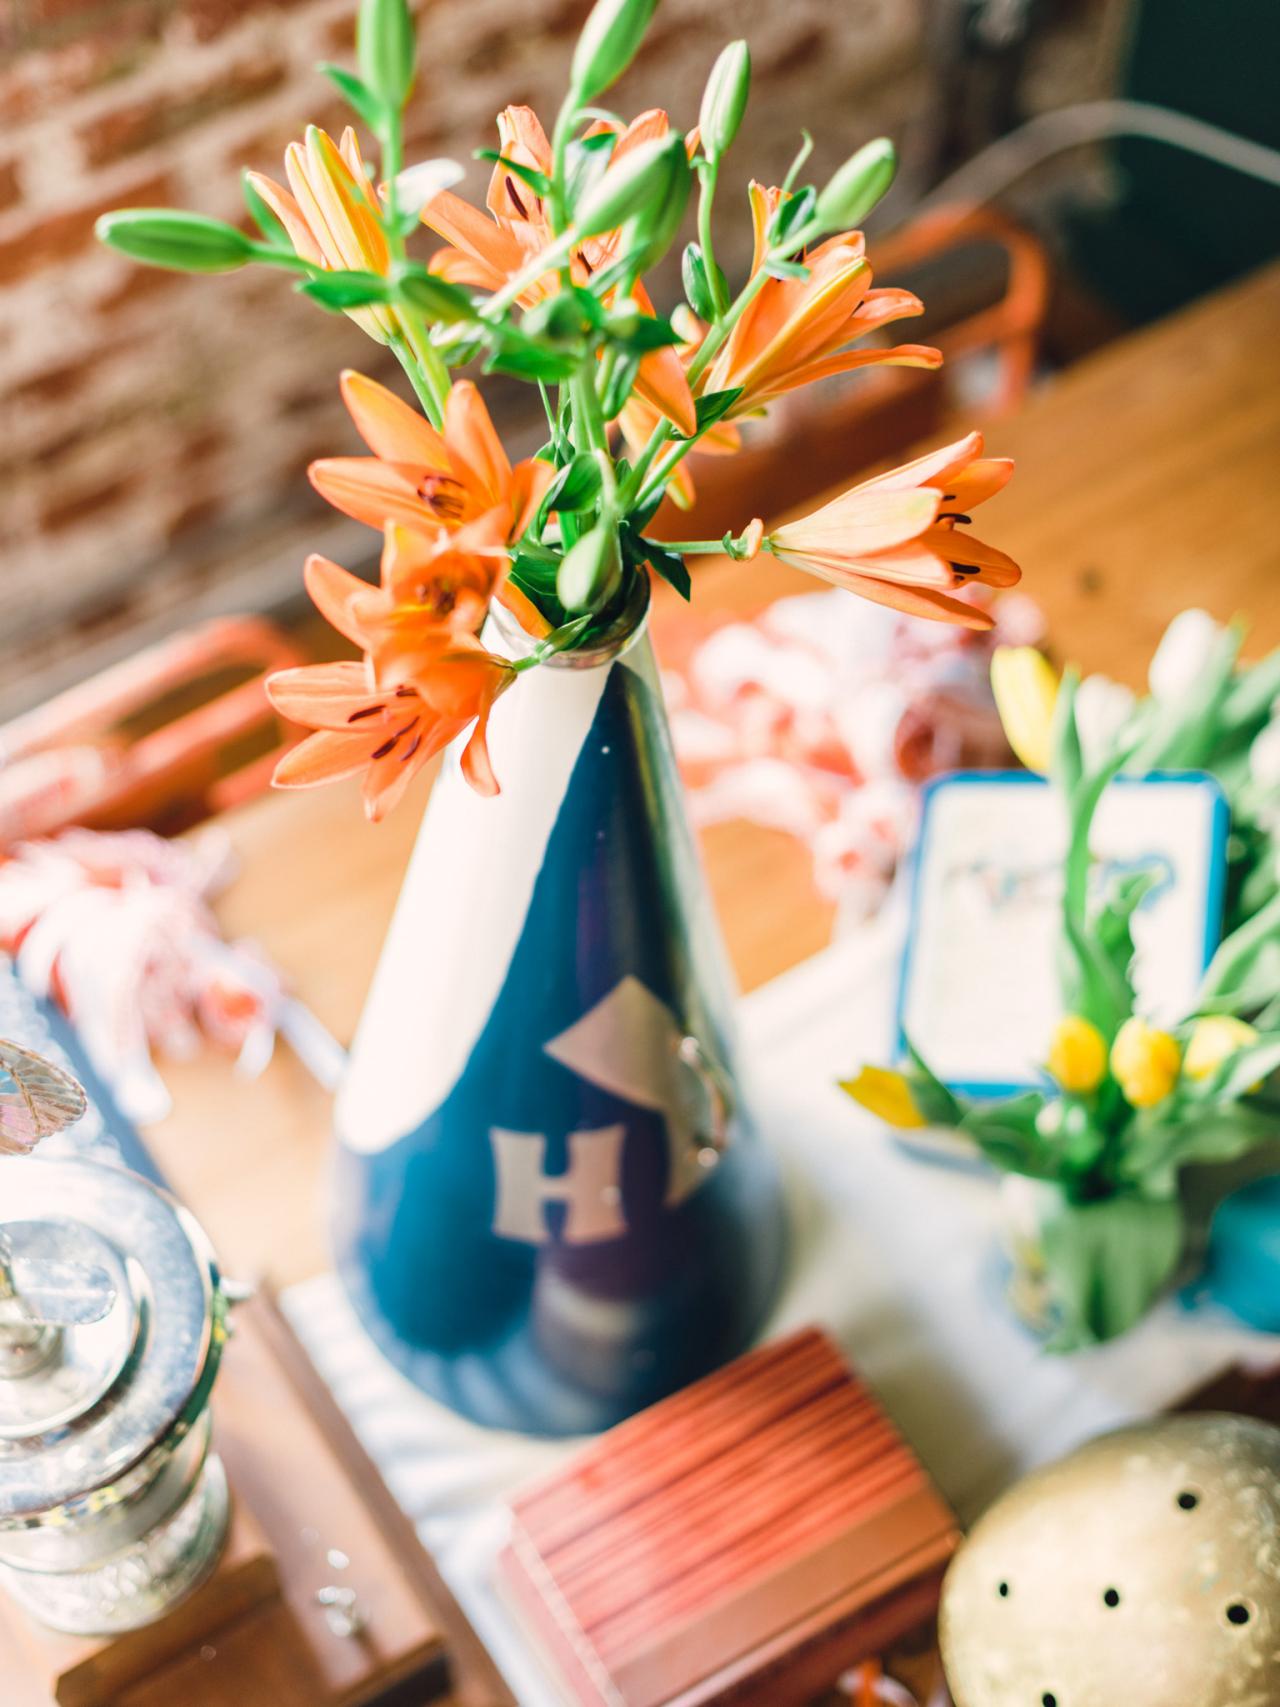 How To Use Megaphones As Varsity Chic Floral Vessels How Tos Diy